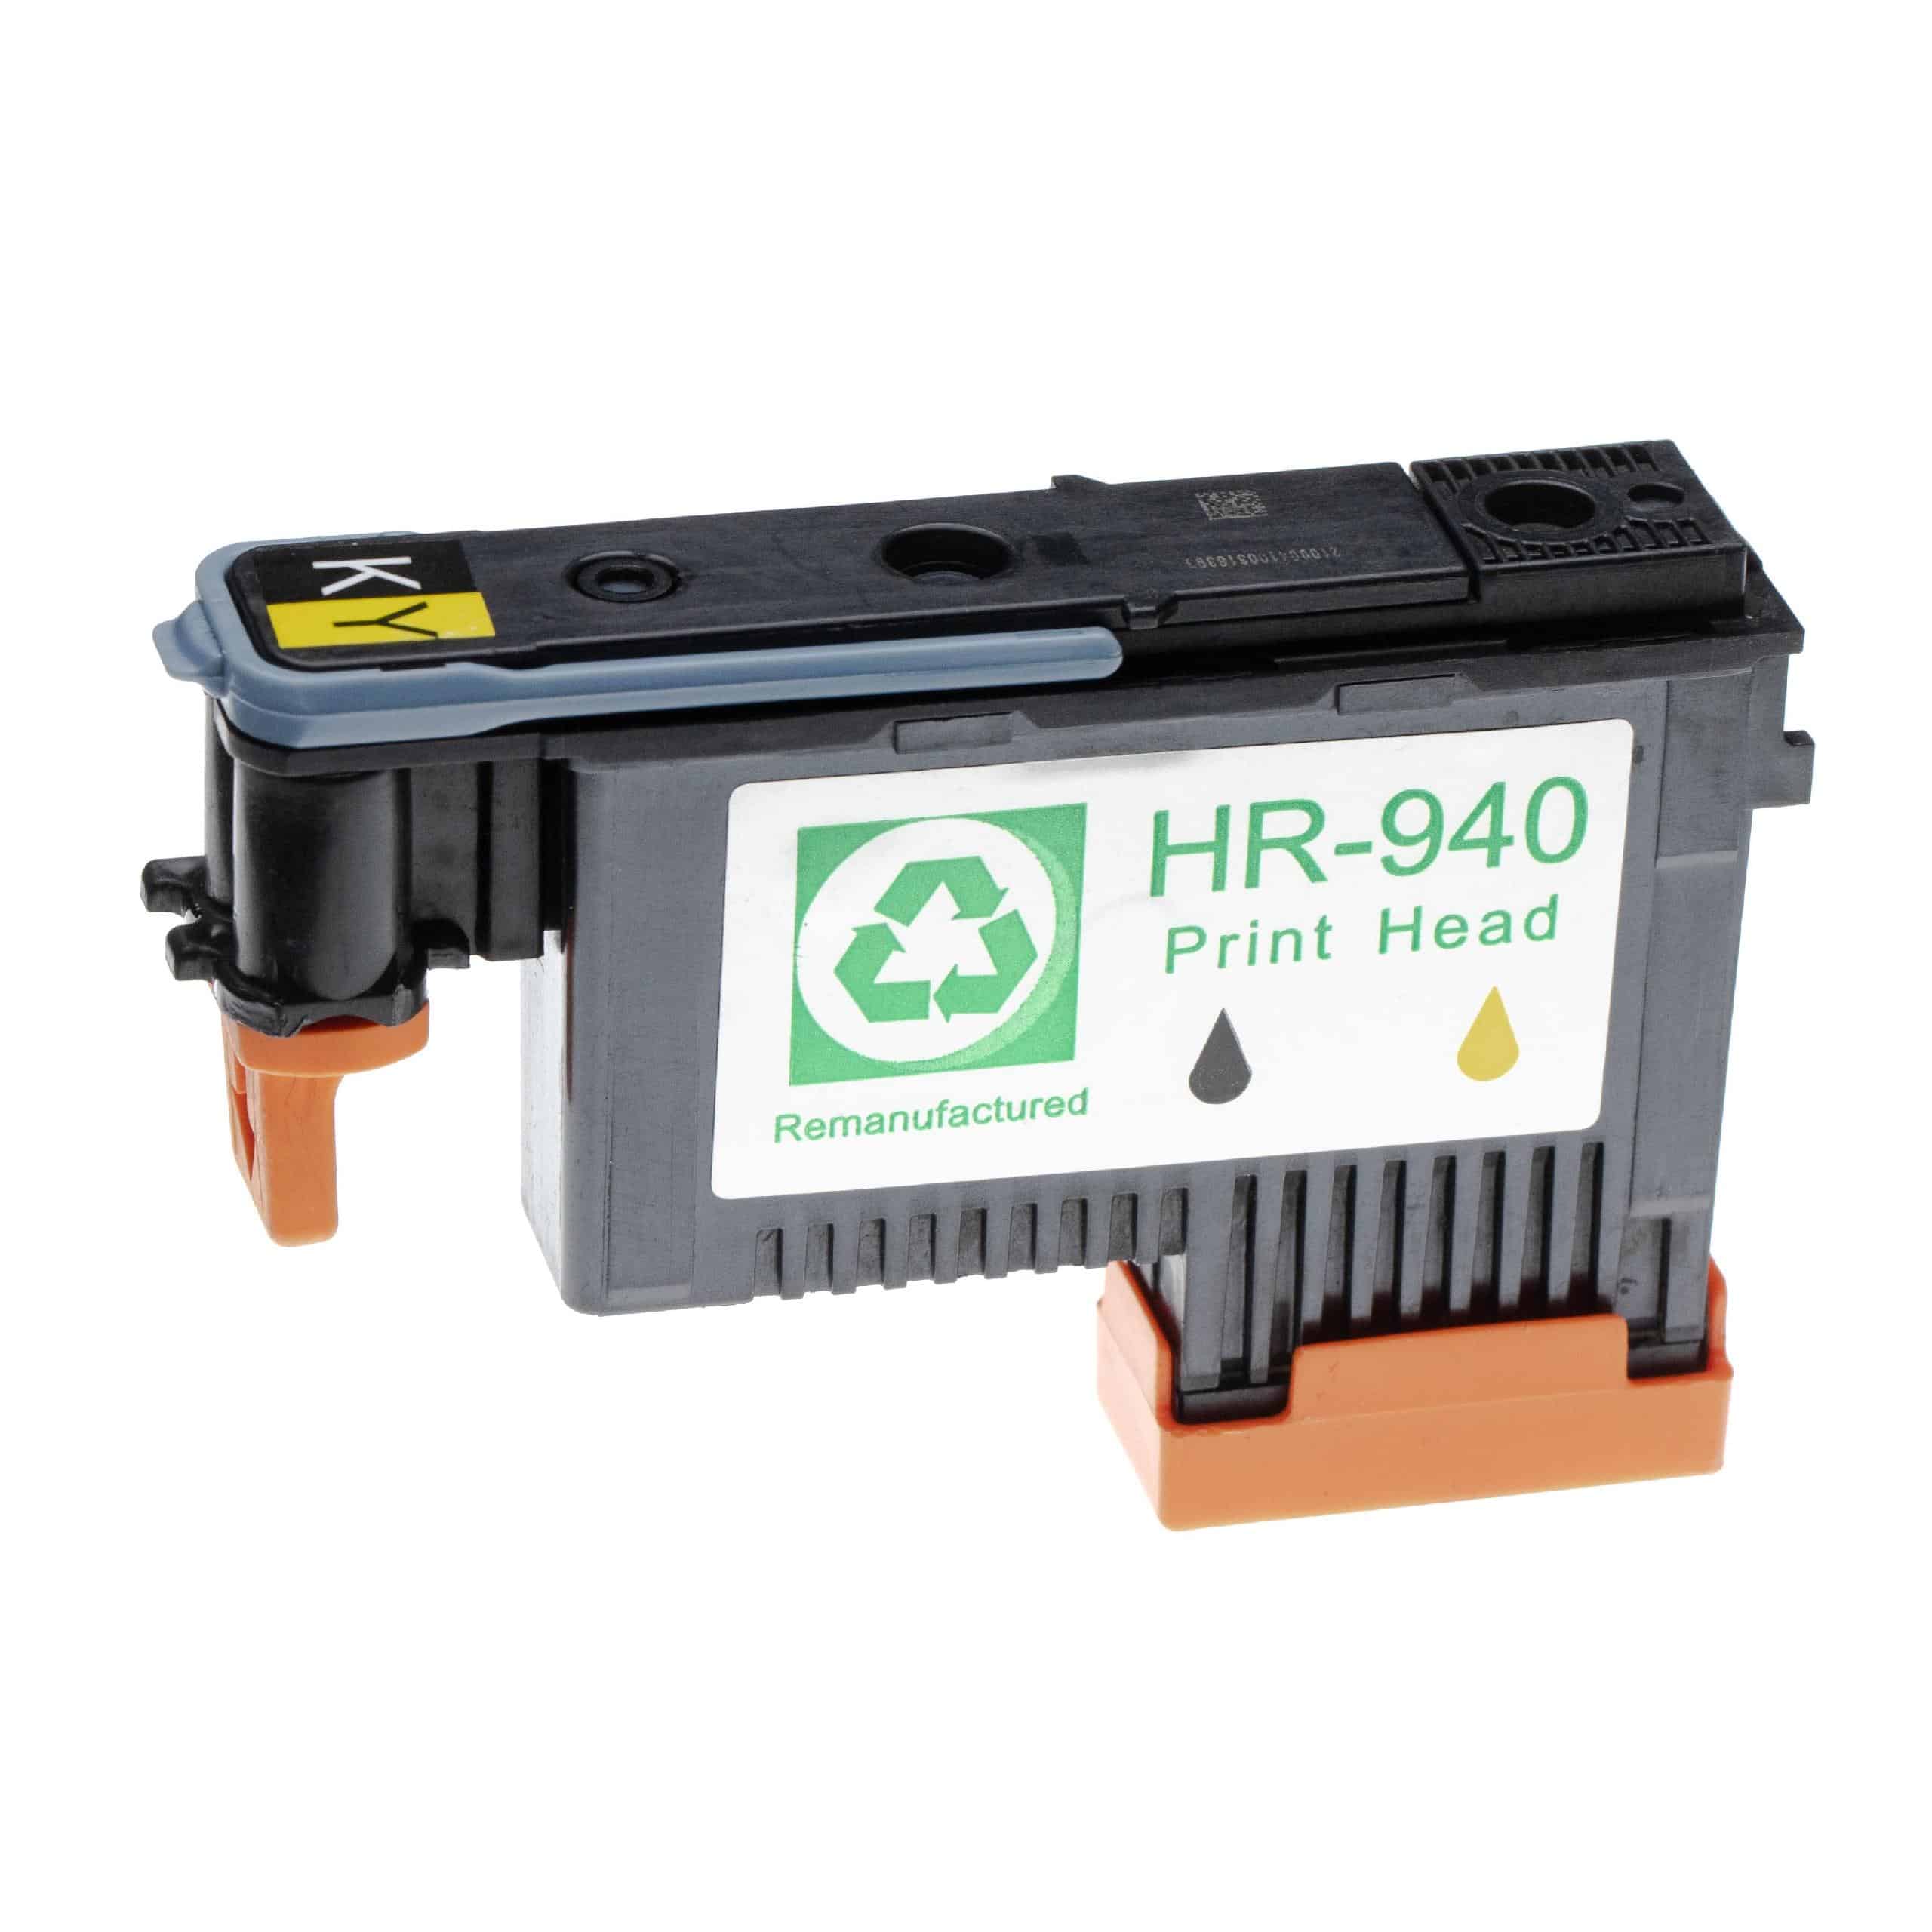 Printhead for HP Officejet Pro HP 940, C4900A Printer - black/yellow, Refurbished